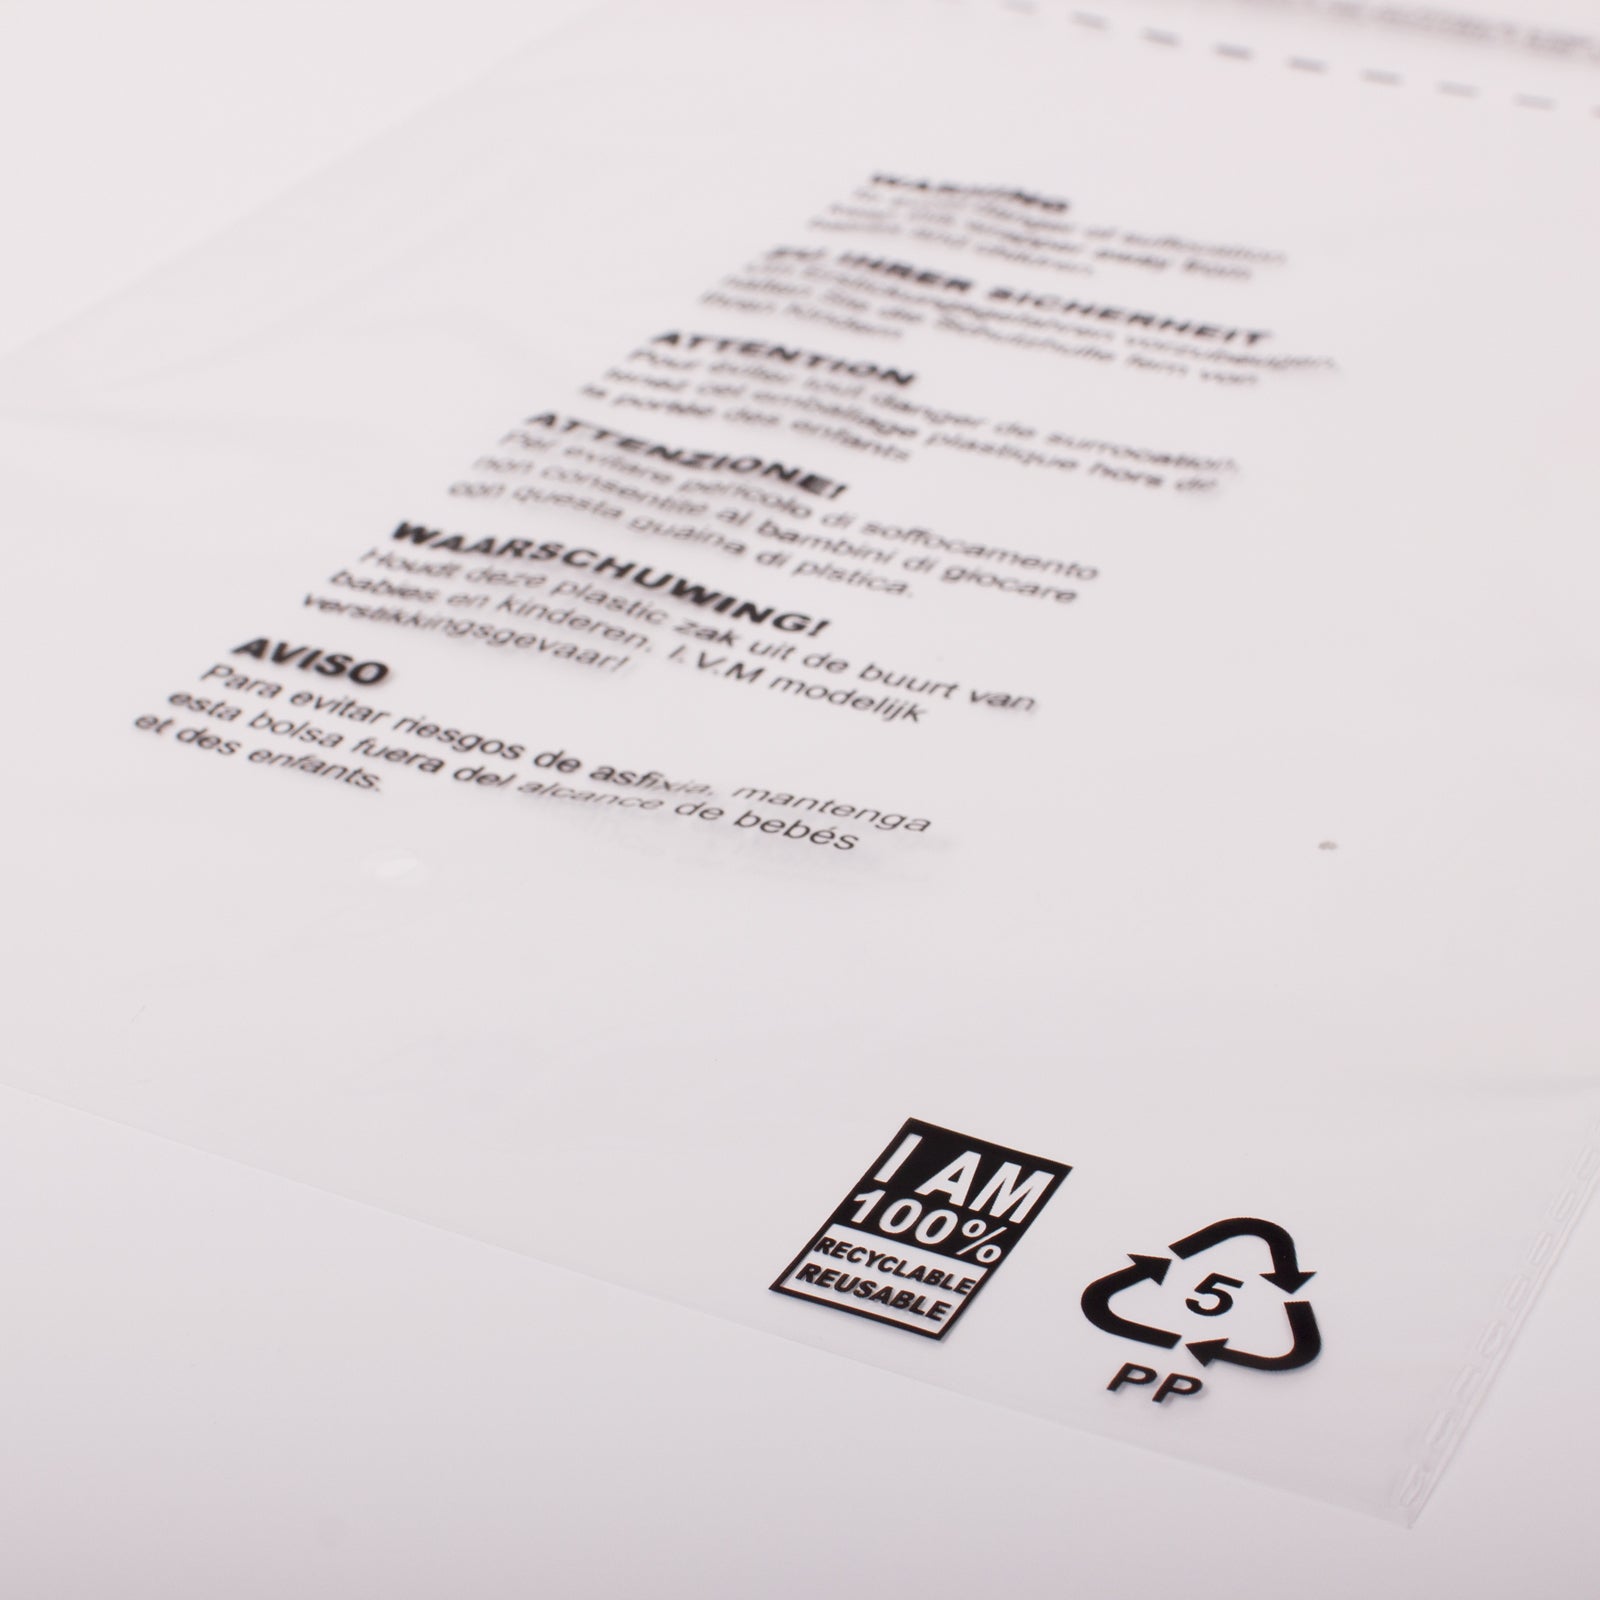 9 x 12 Clear Mailing Bag with 'I AM 100% RECYCLABLE'